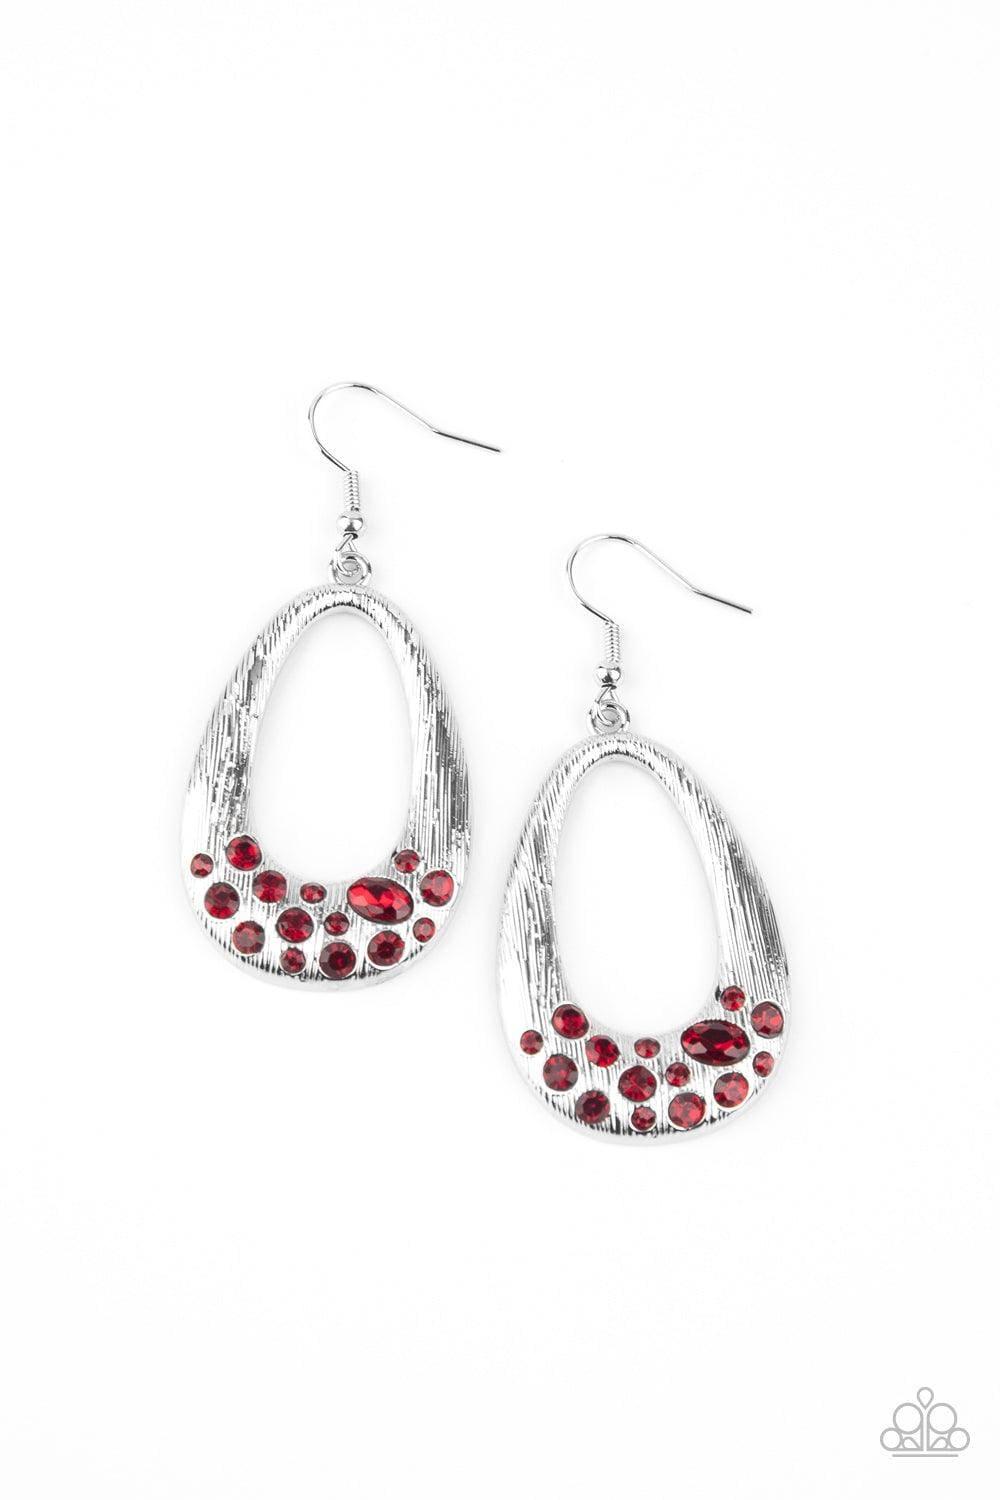 Paparazzi Accessories - Better Luxe Next Time - Red Earrings - Bling by JessieK